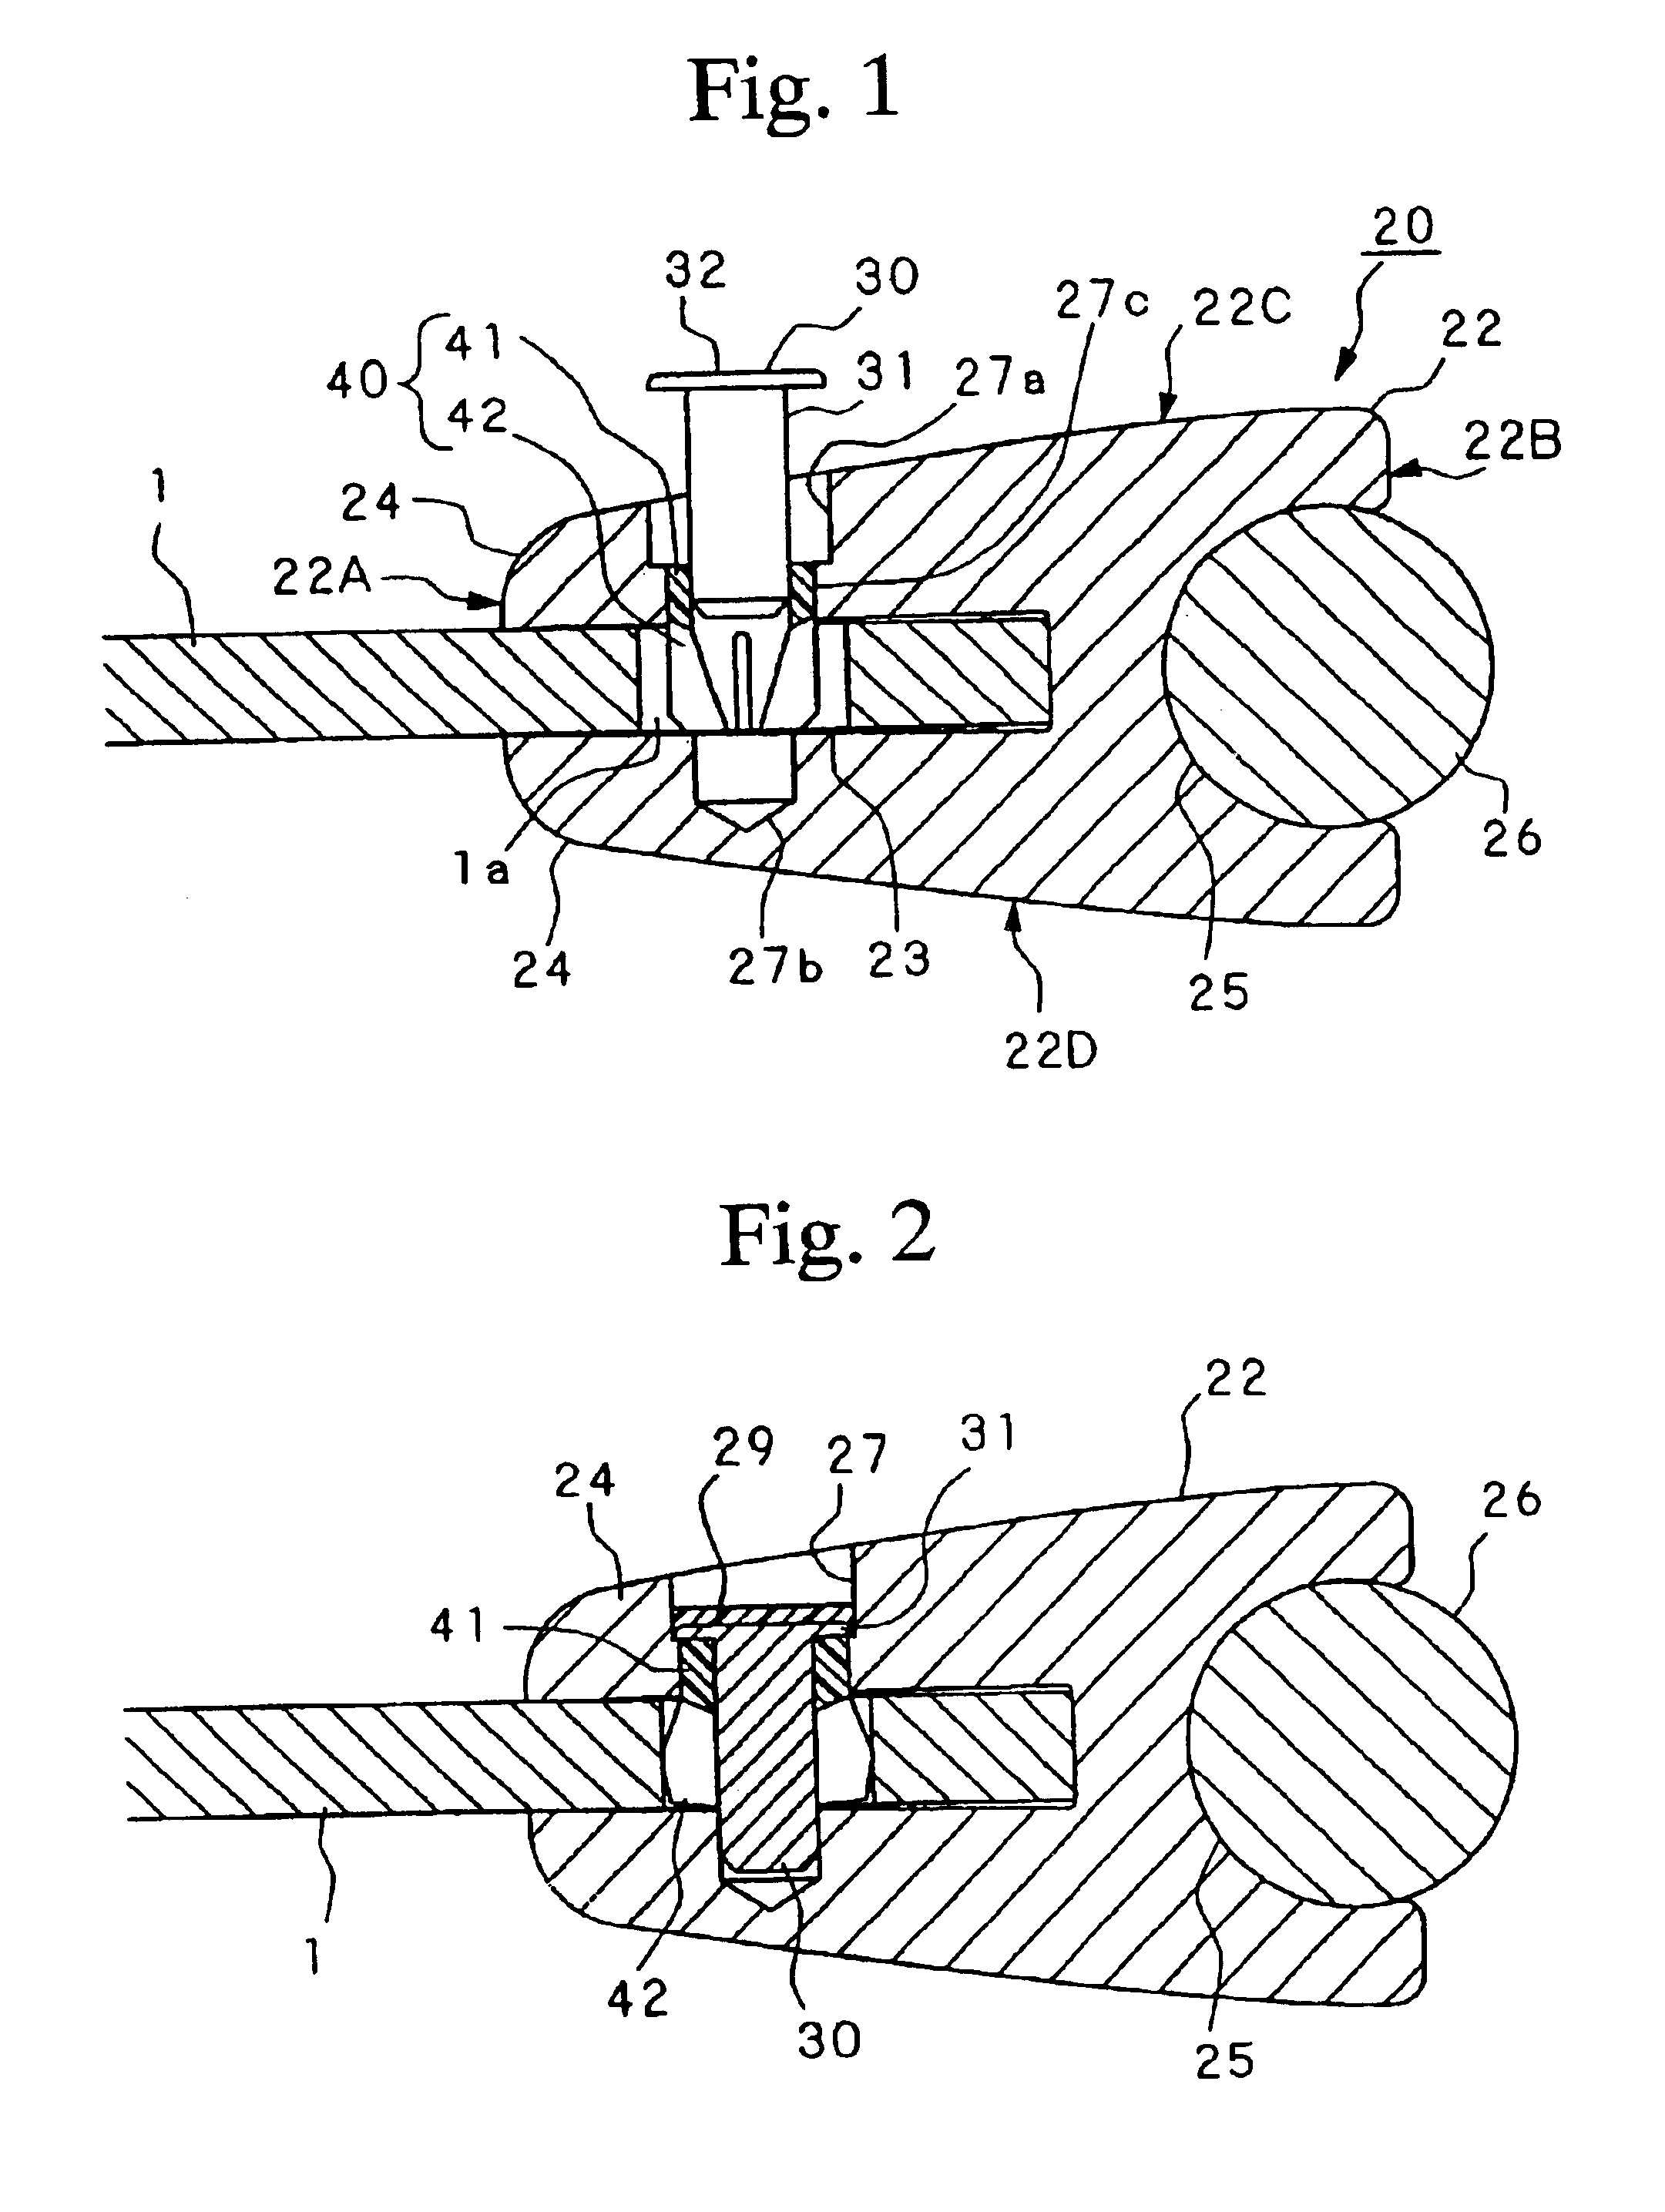 Edge insulating member for electrode plate, method of locking and unlocking the edge insulating member, and edge insulating member installation jig